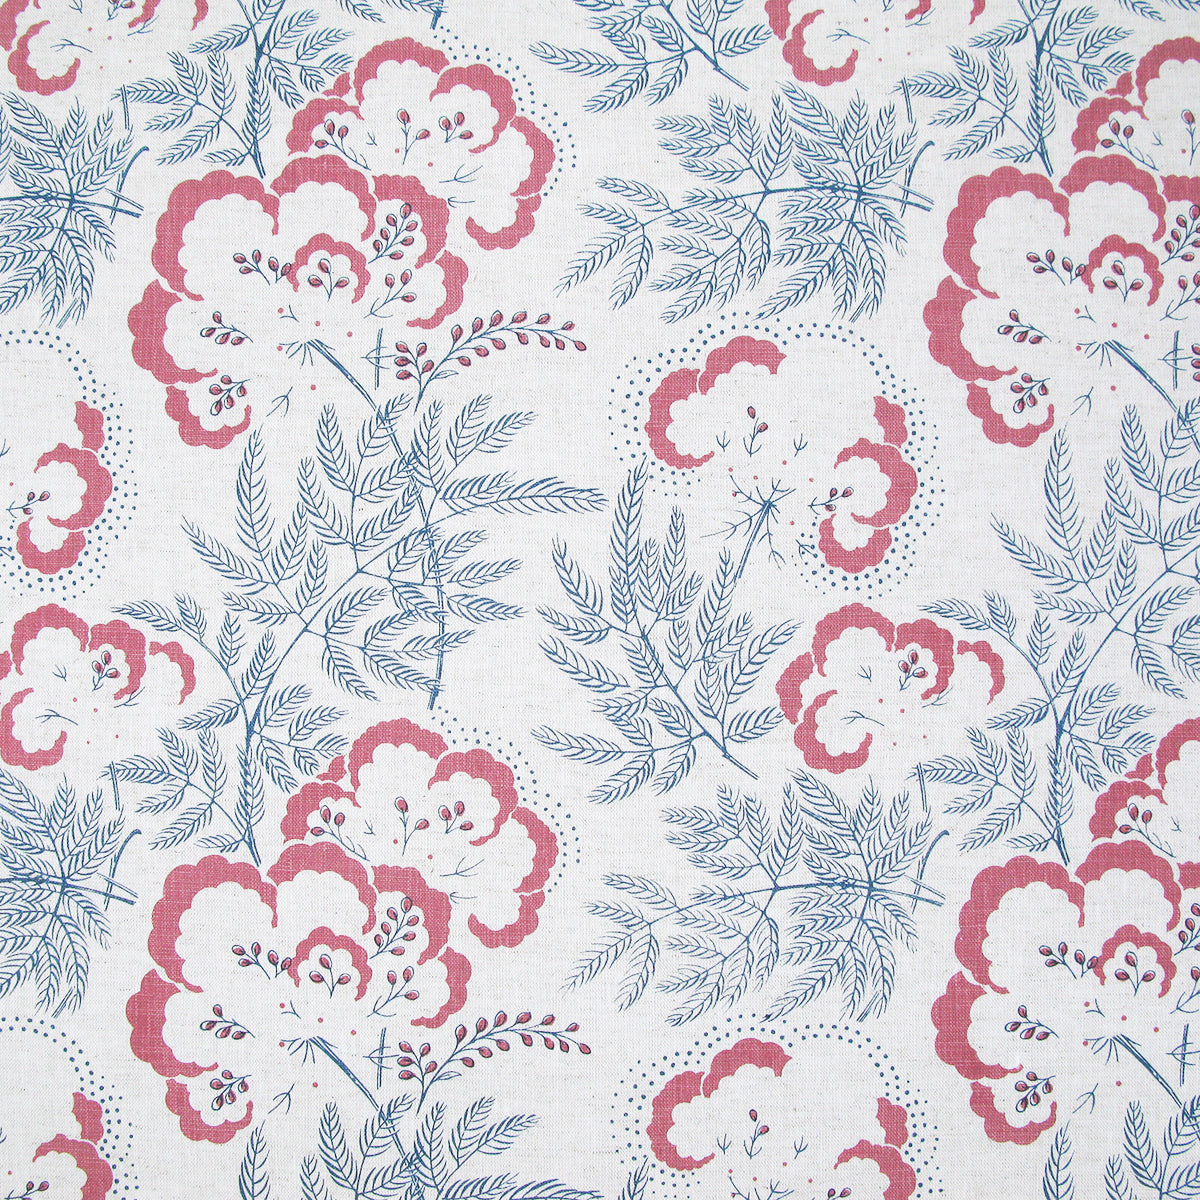 Detail of fabric in an intricate floral print in pink and navy on a white field.